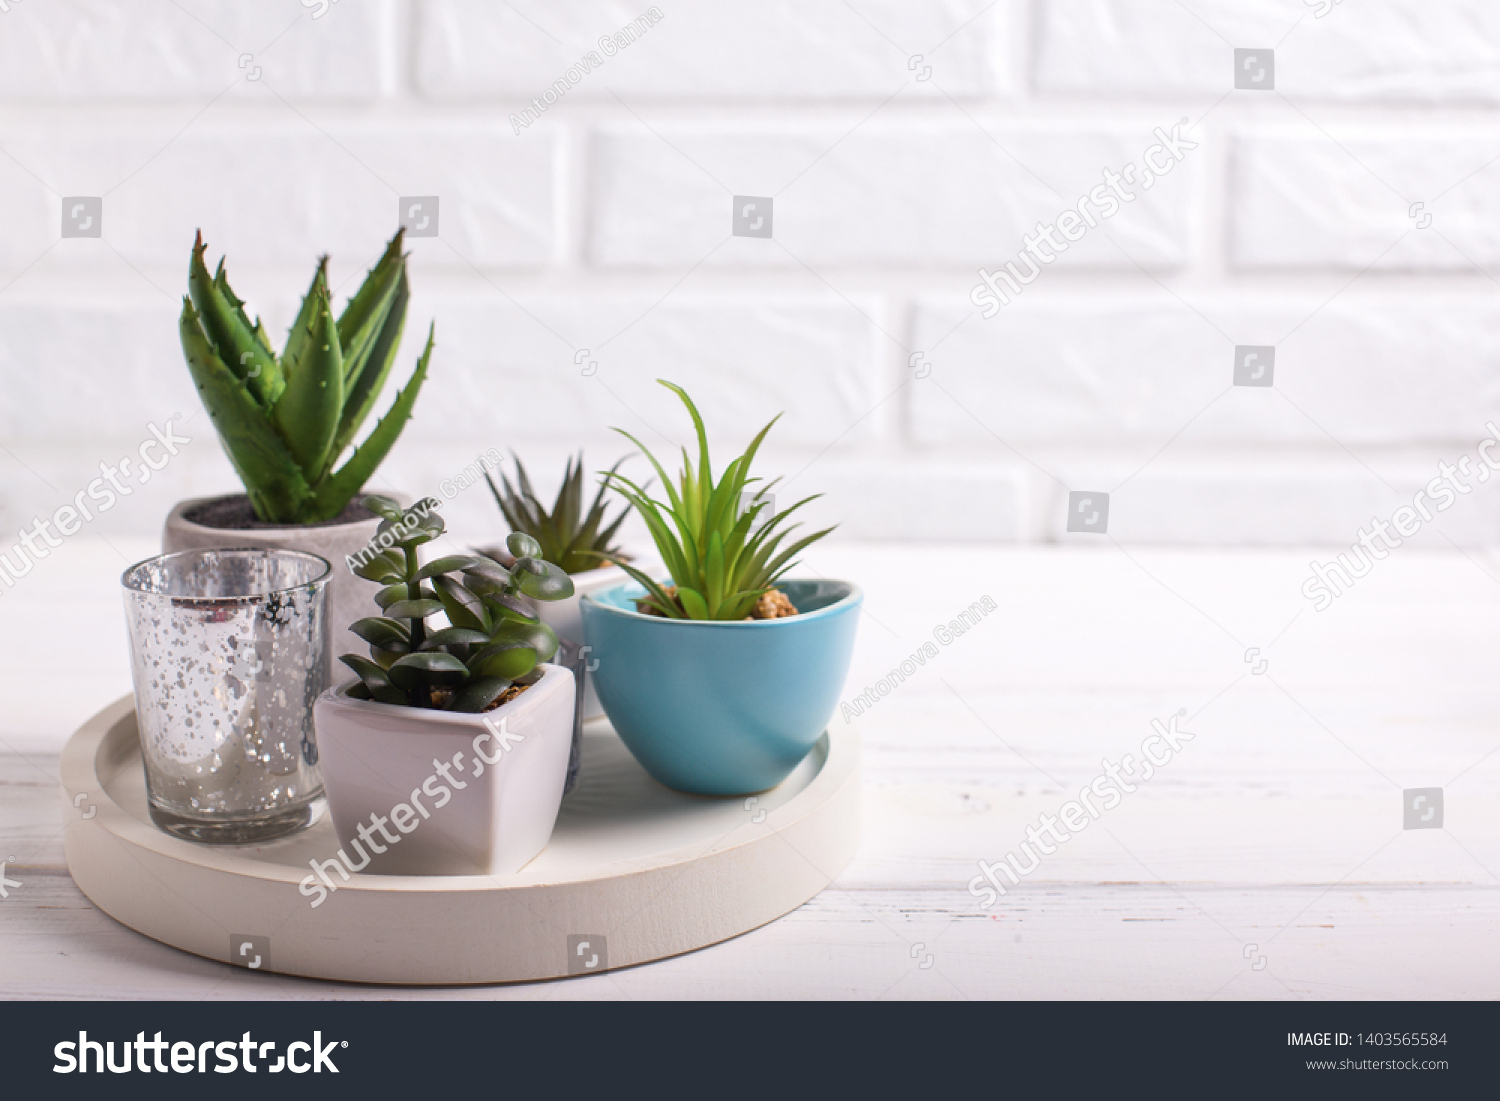 Succulents and cactus plants in pots on tray  near by white brick wall. Potted indoor house plants. Modern minimalistic interior. Selective focus. Place for text. #1403565584